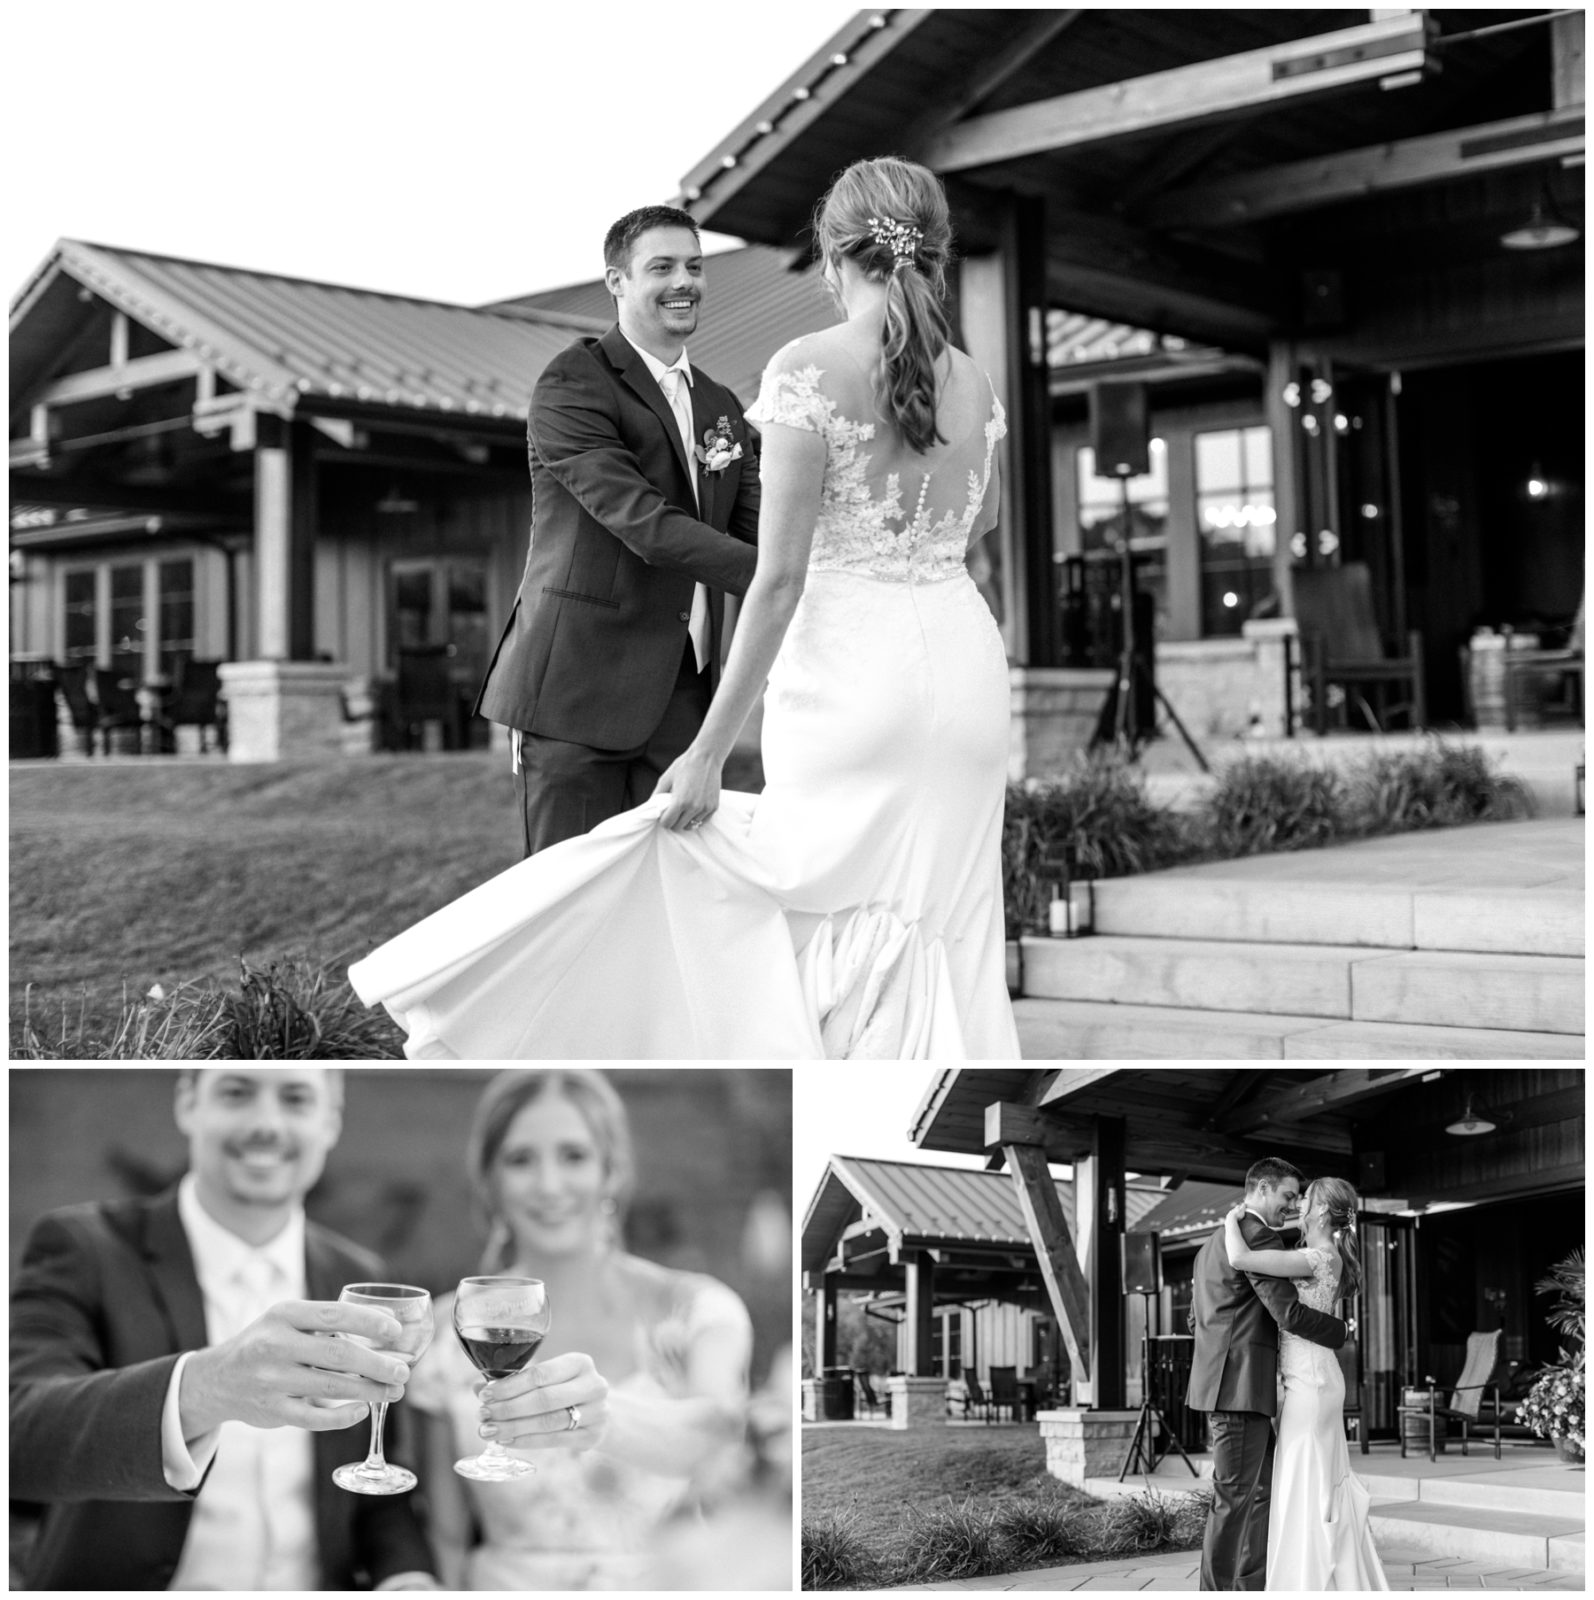 Bride and groom dancing and toasting.